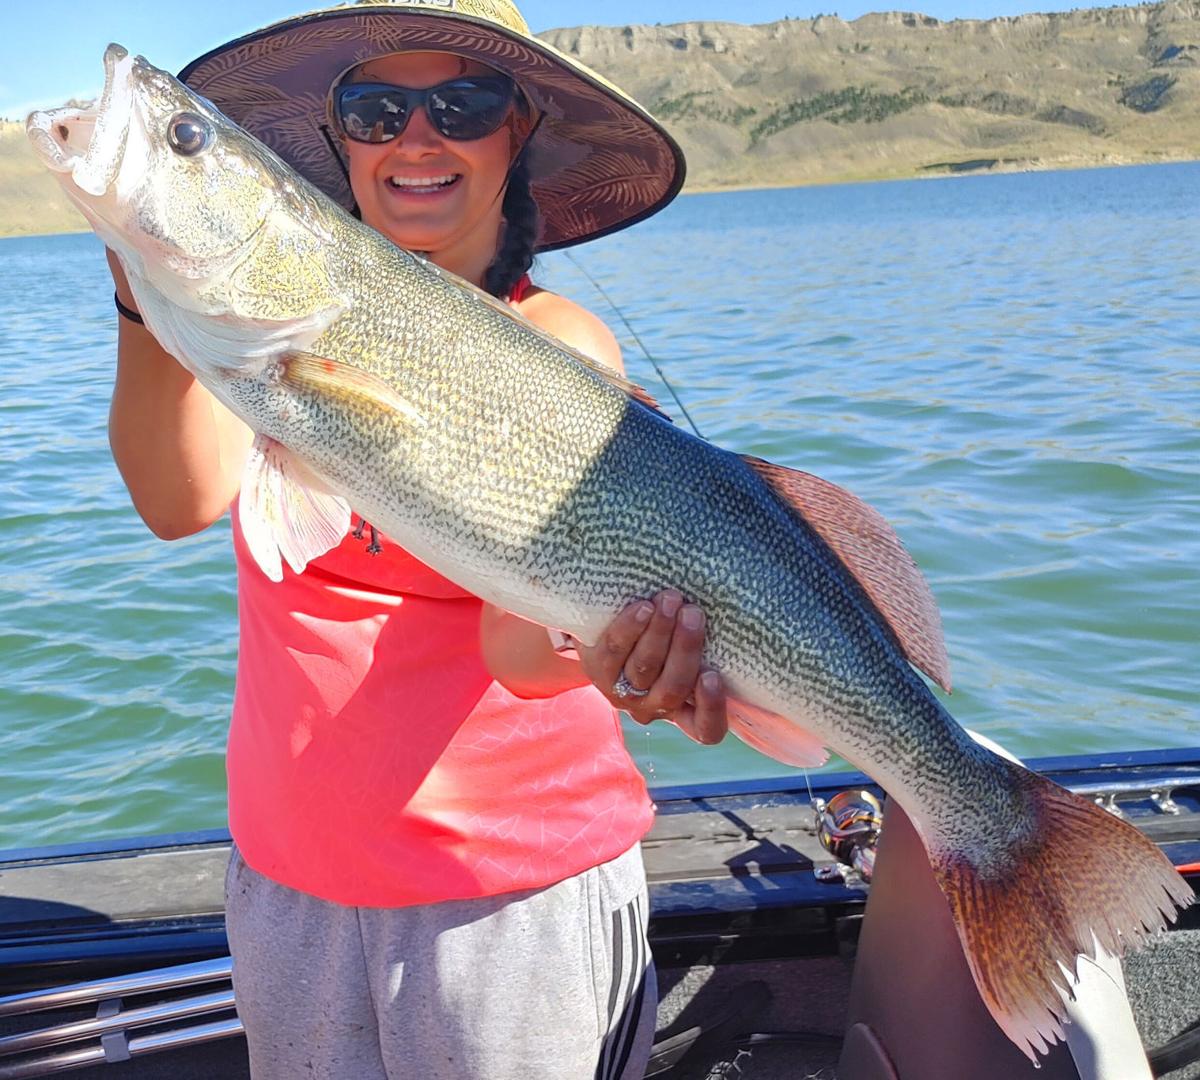 Fishing report: Phenomenal walleye at Fort Peck's Crooked Creek